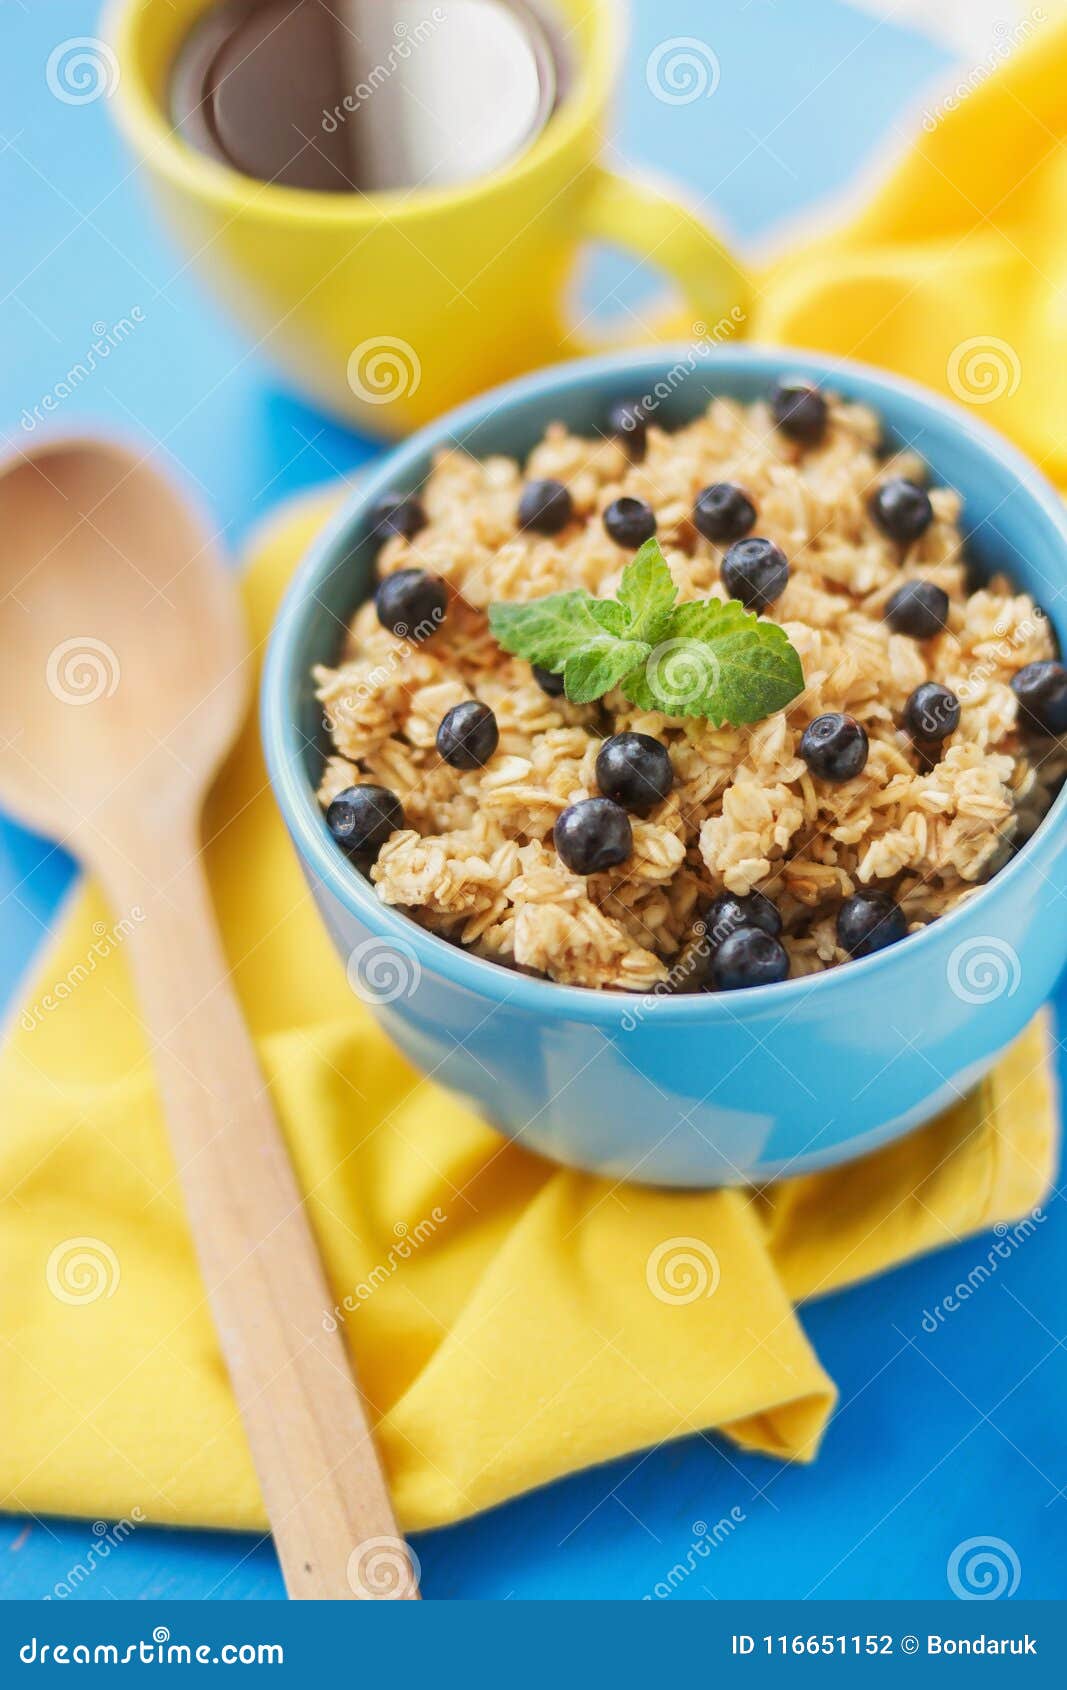 Oatmeal with Blackberries, Delicious Breakfast Stock Photo - Image of ...